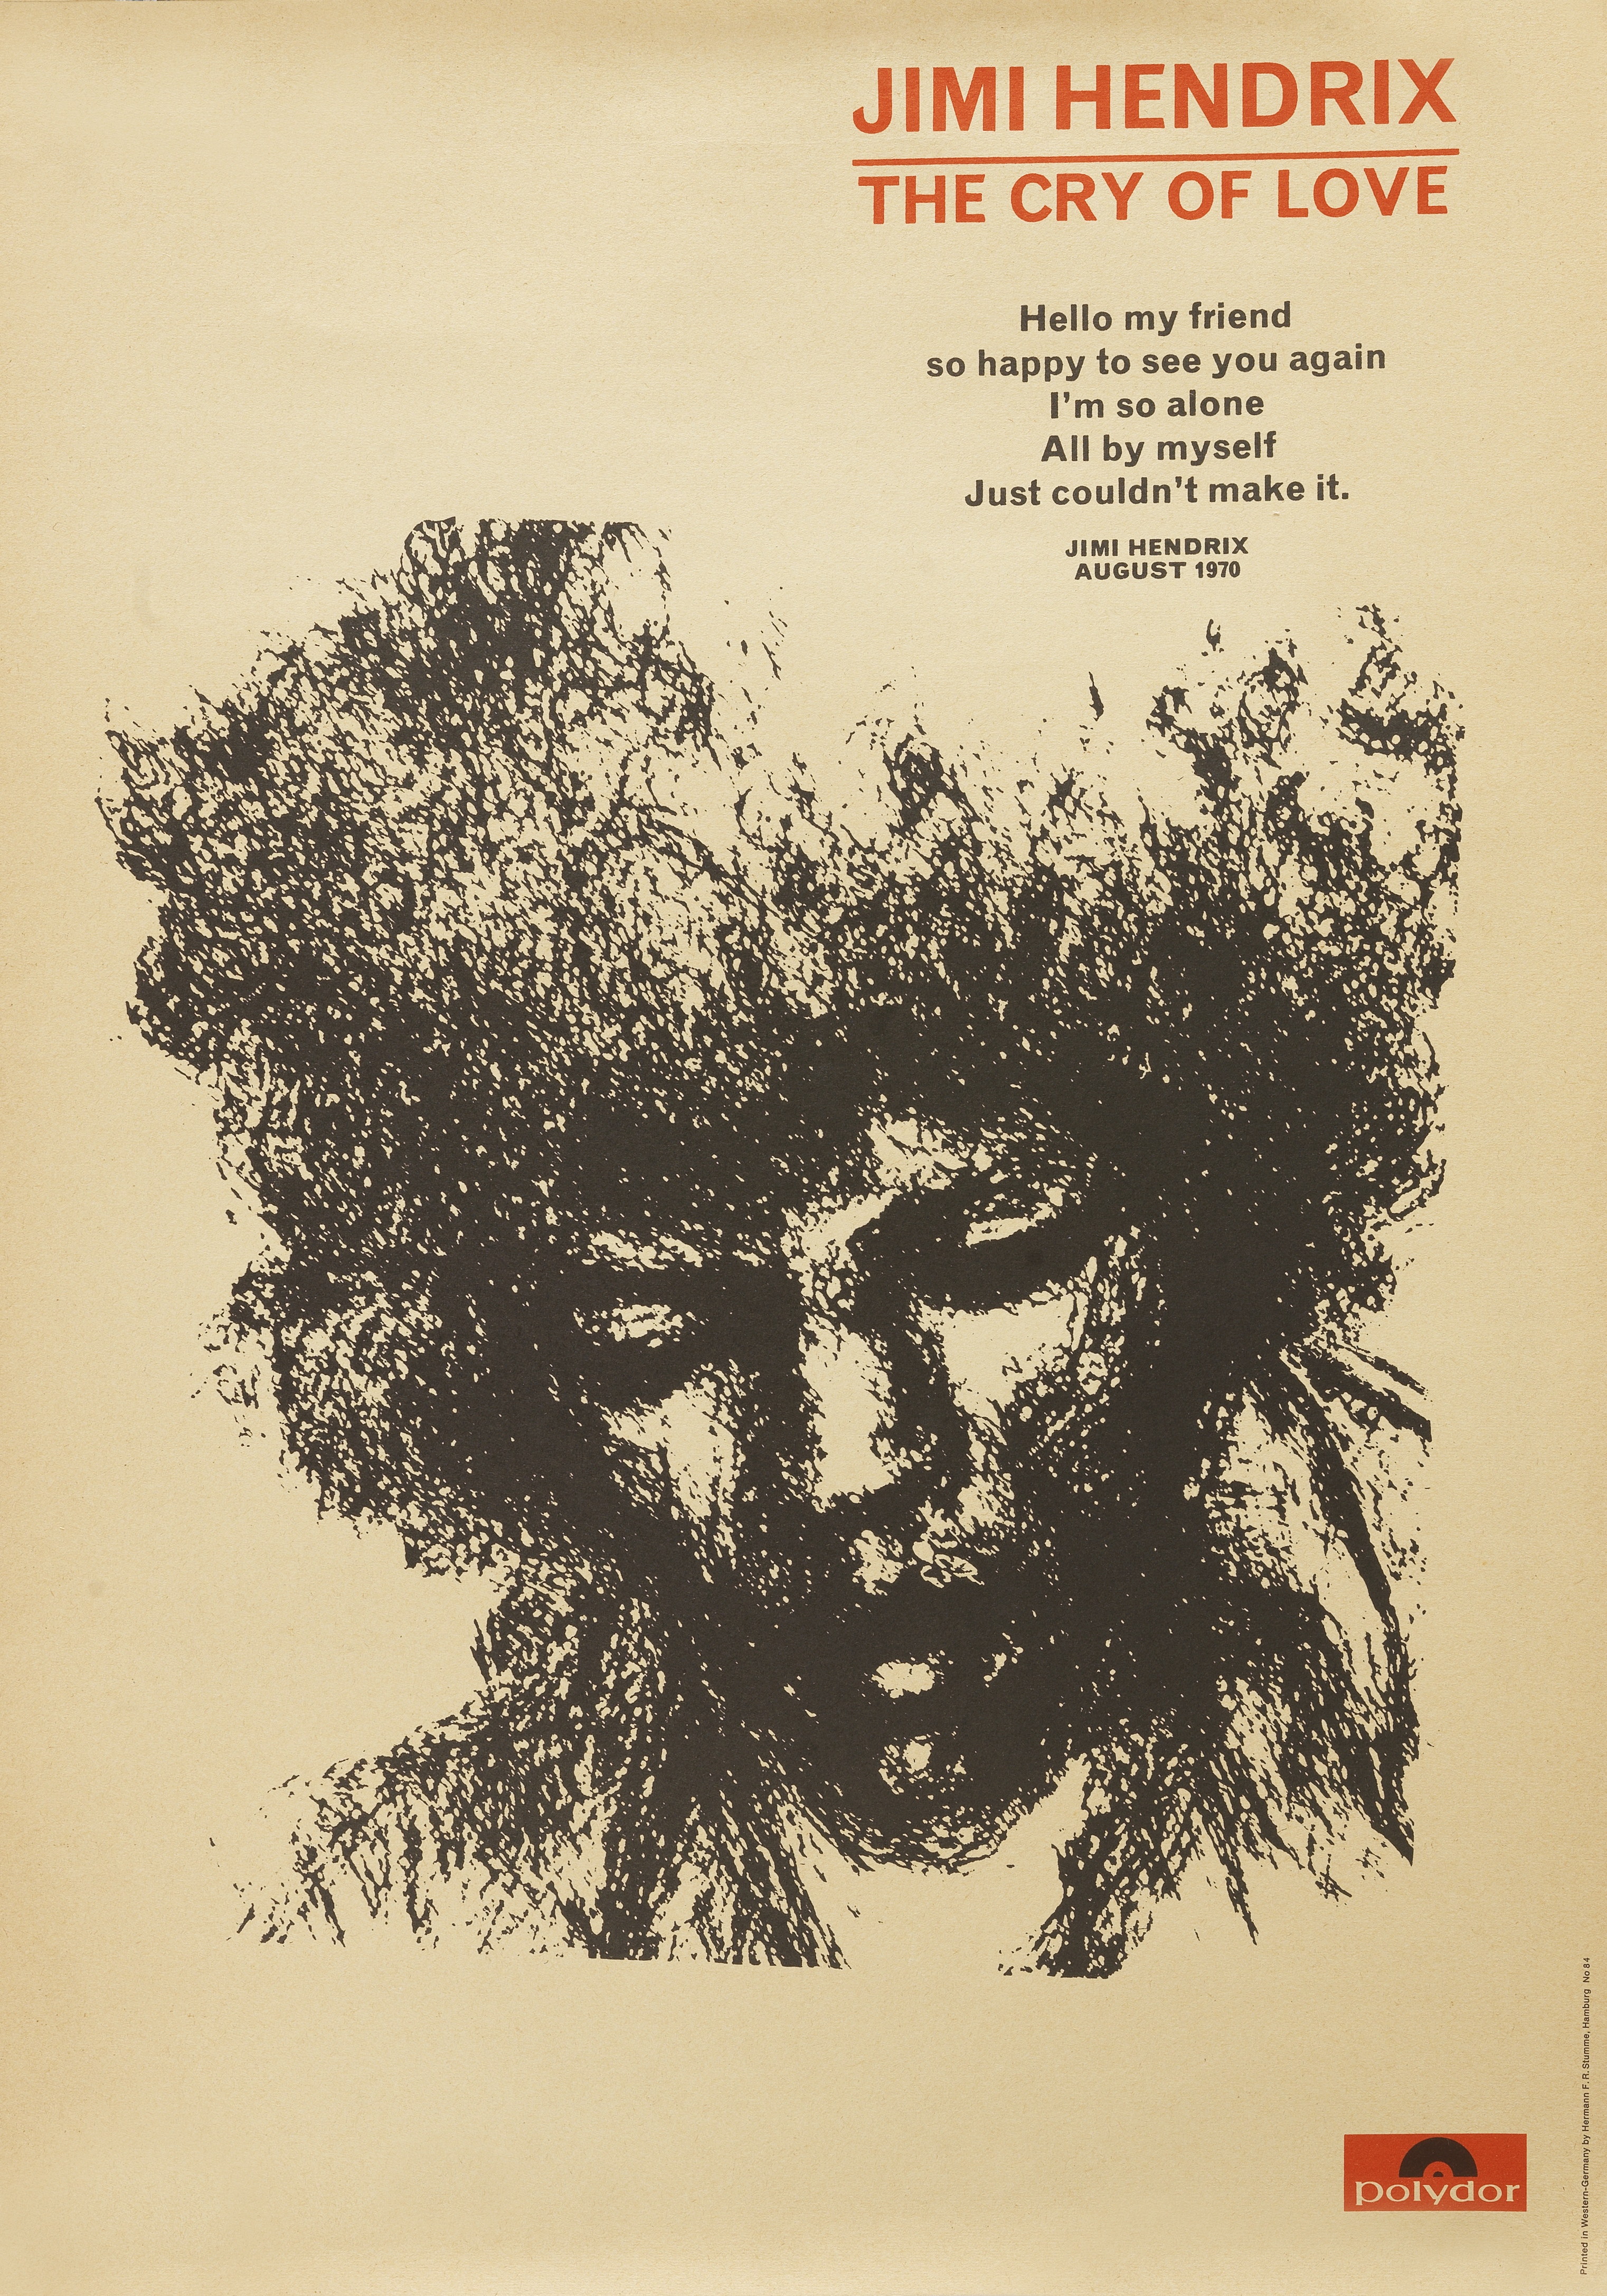 Jimi Hendrix: An original promotional poster for The Cry of Love, August 1970,